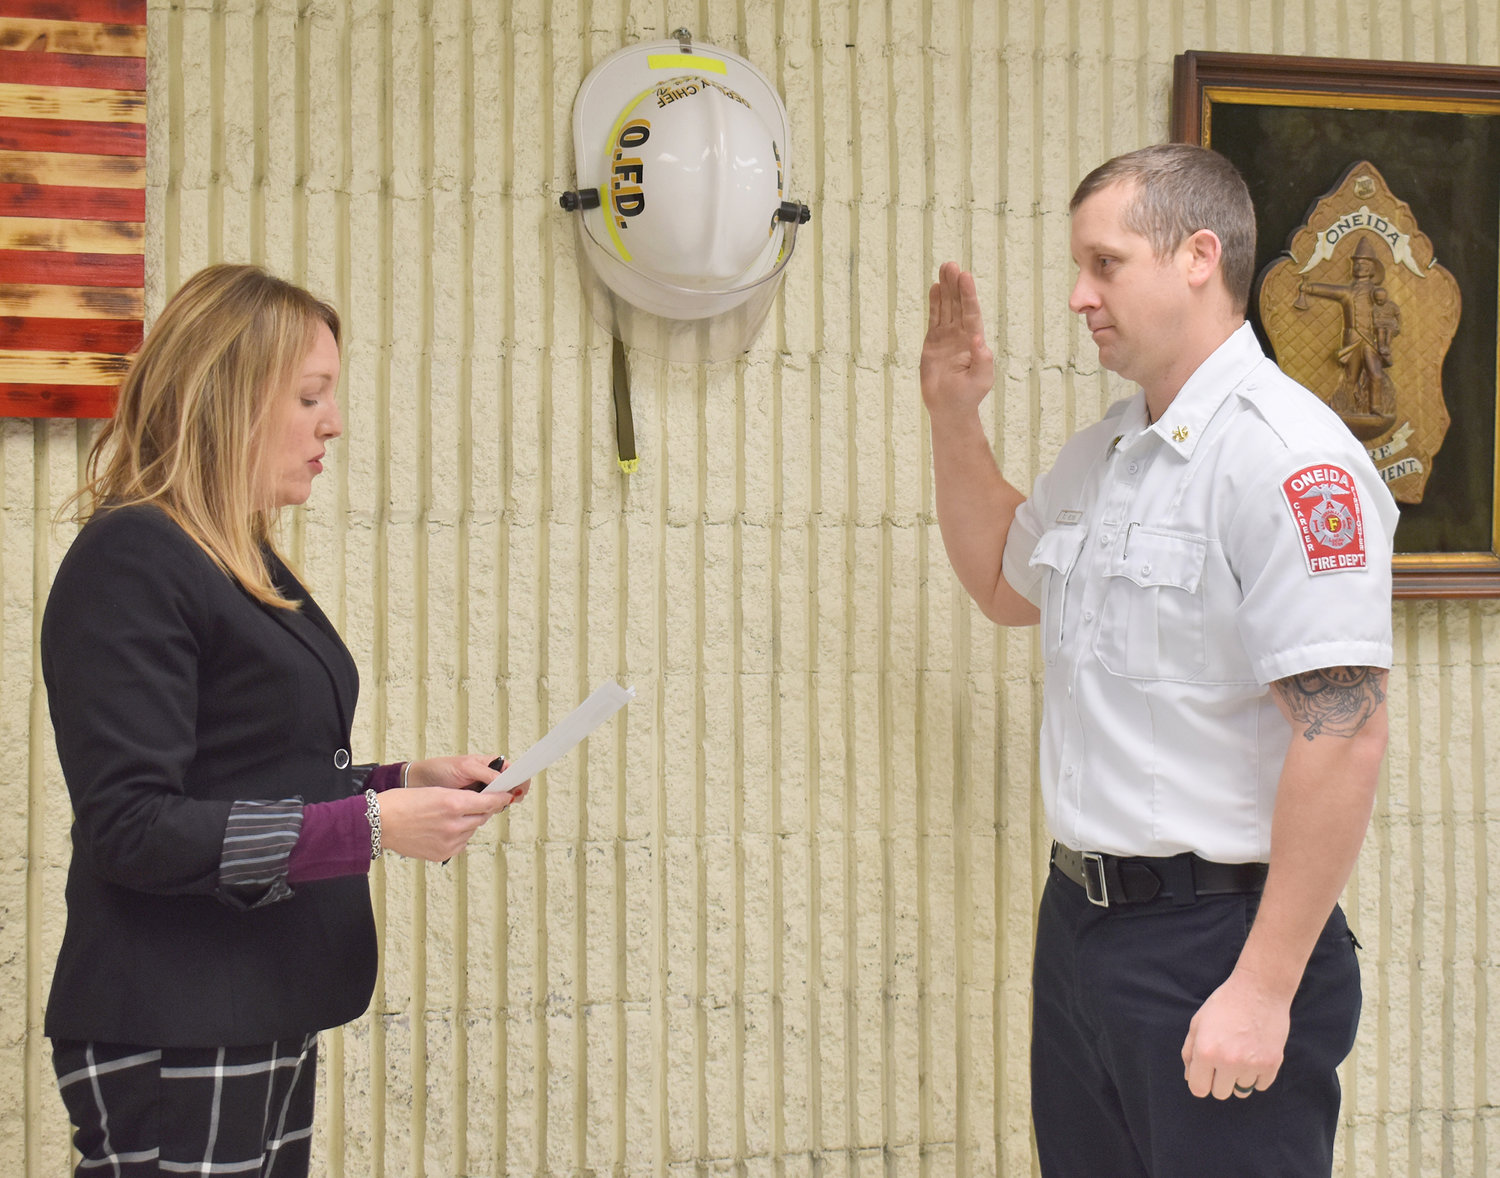 SWORN IN — On Monday, Jan. 17, 2022, City of Oneida Deputy City Clerk Andrea Hitchings, left, swore in Dennis Relyea as a deputy chief of the Oneida Fire Department. Relyea has been with the department for 12 years; he previously held the position of lieutenant.